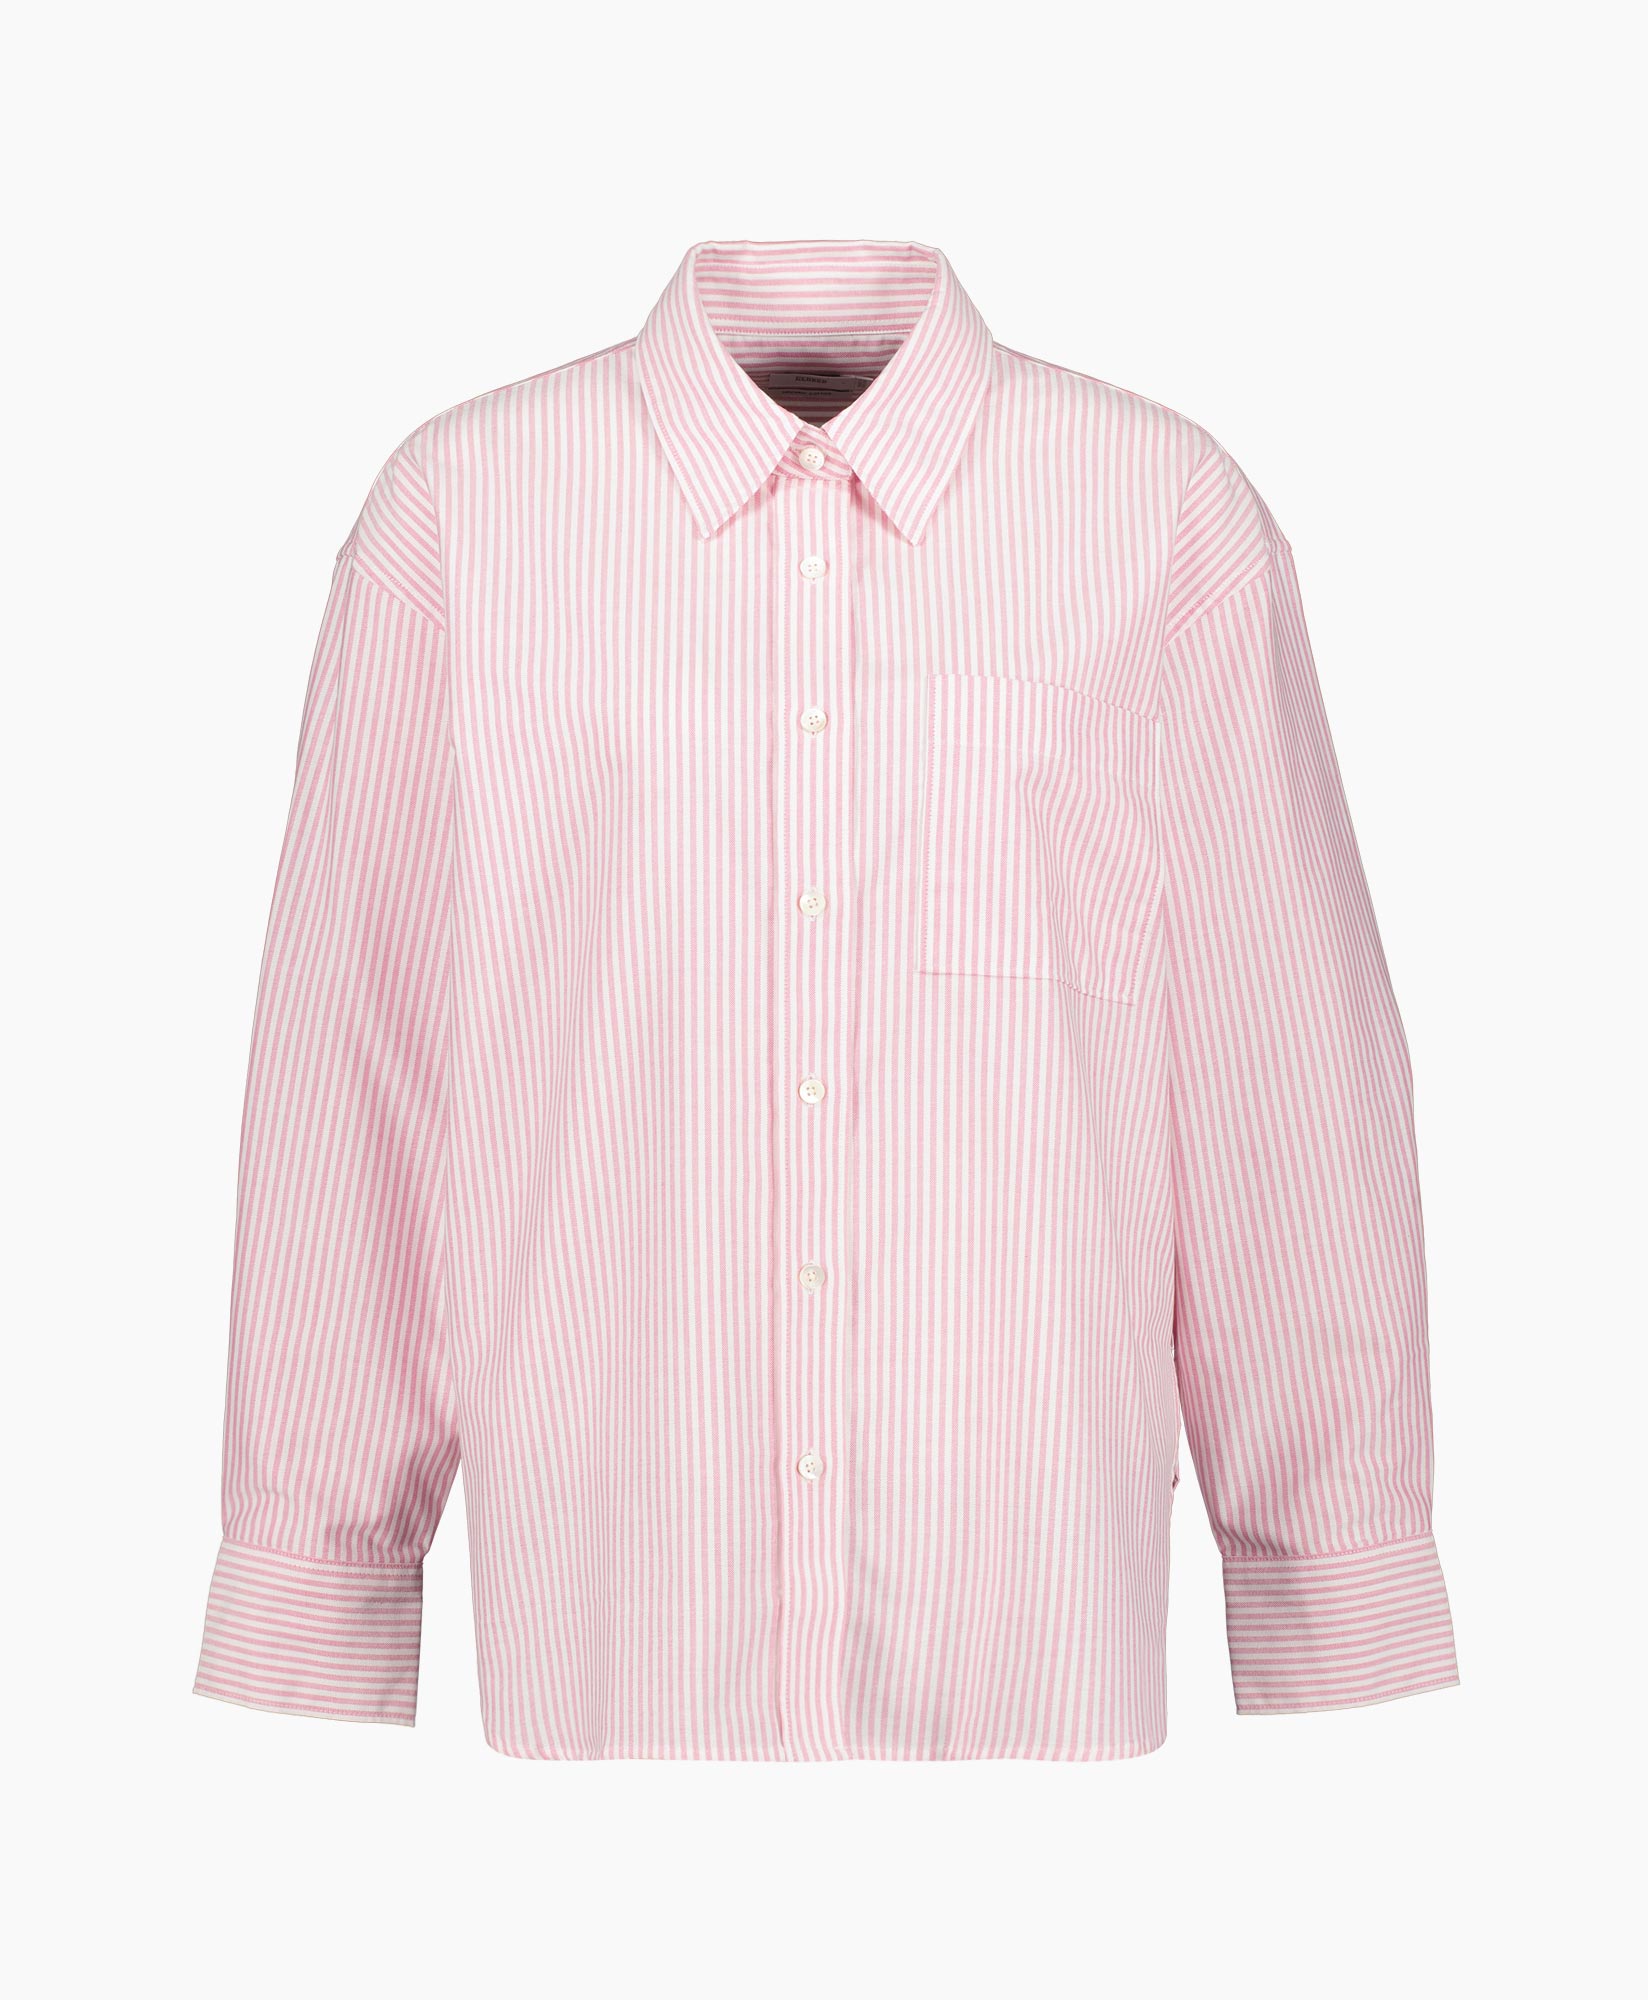 Closed Blouse Shirt With Pockets Pink